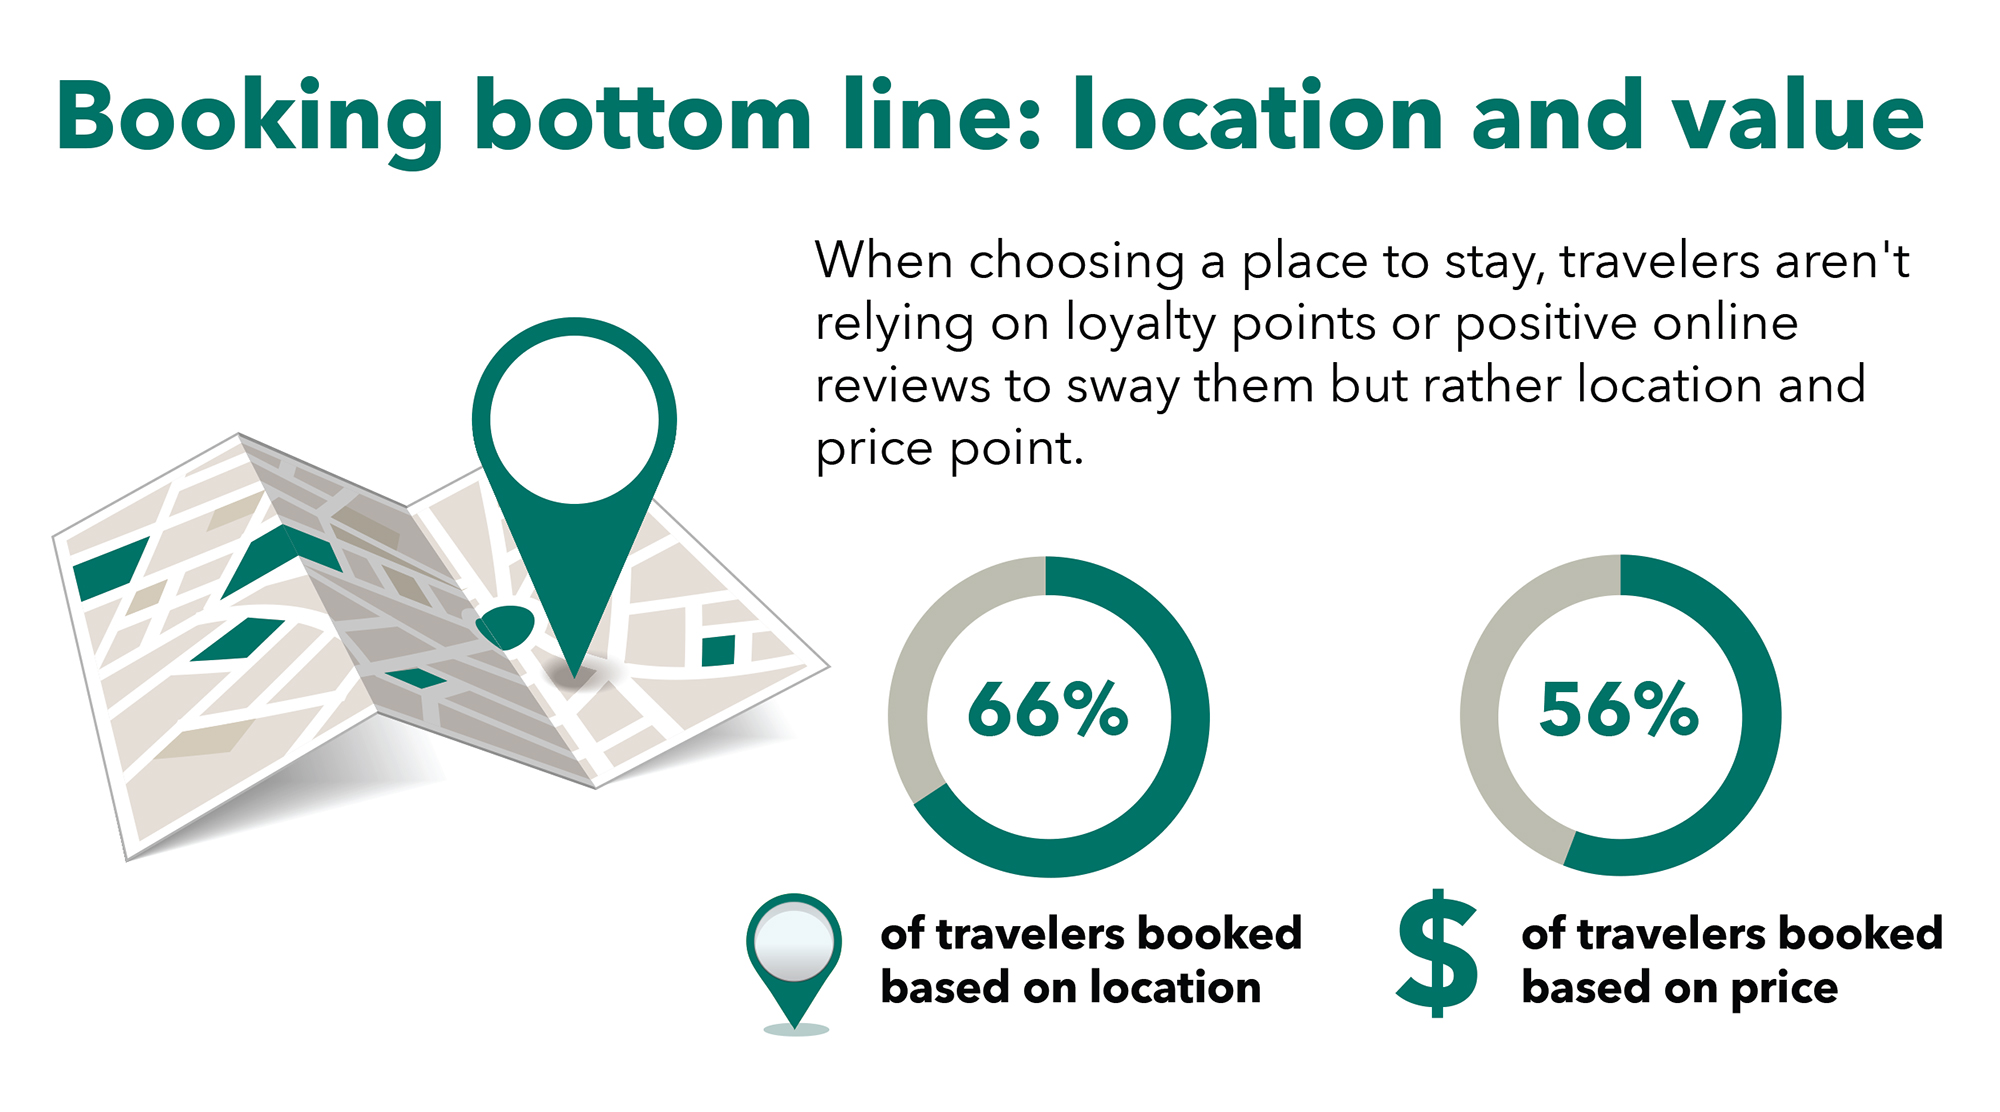 Location and value drive hotel selection choice according to Homewood Suites’ Workstyles Study